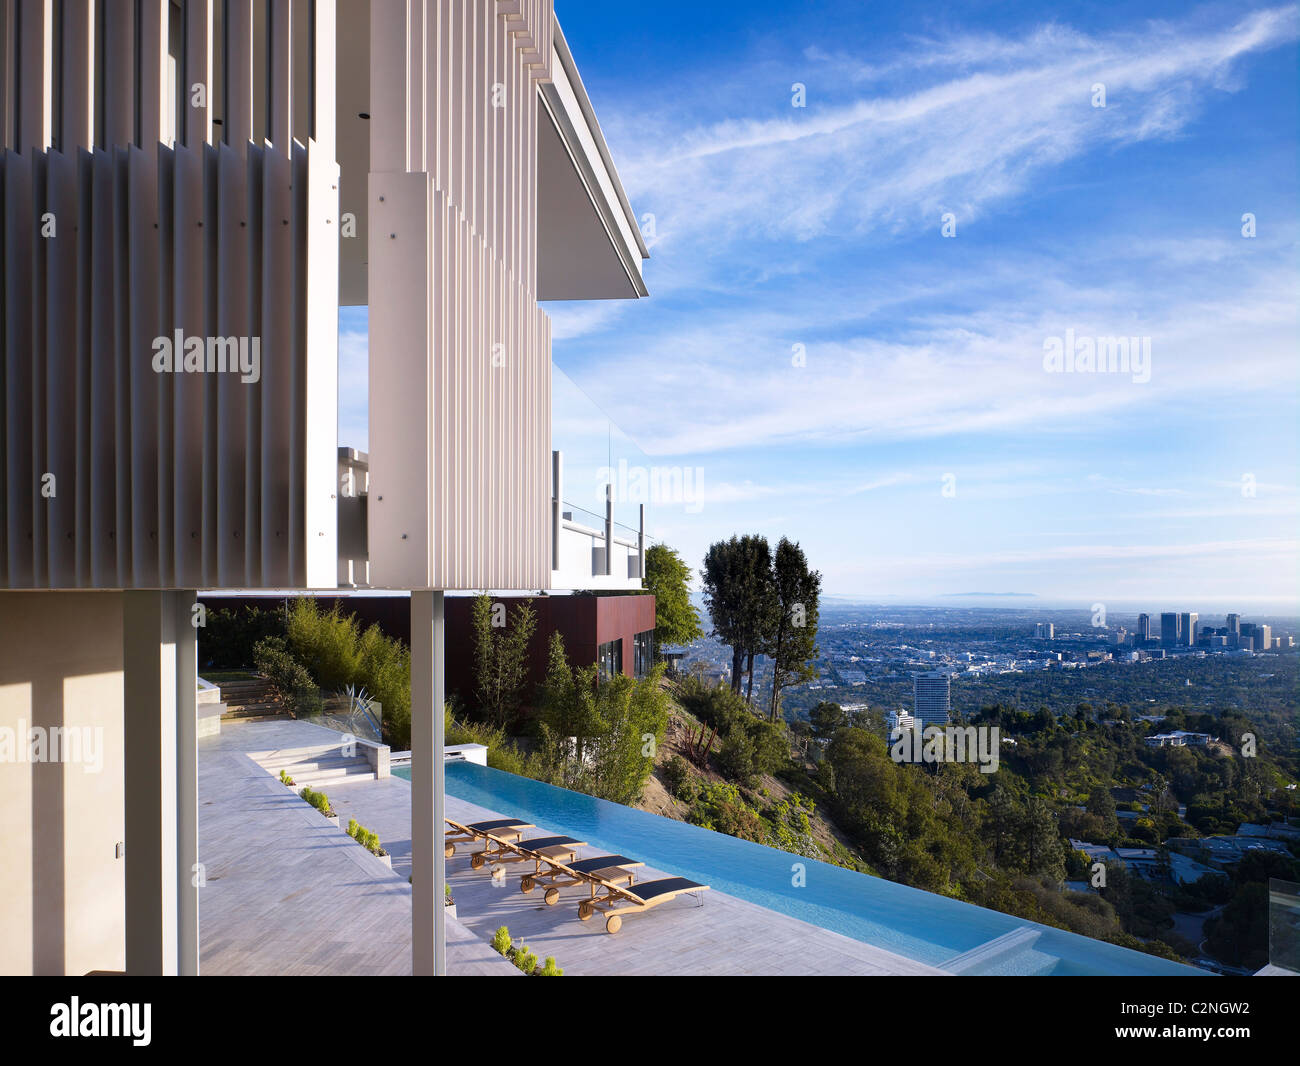 Modern detached house, West Hollywood, California. View across terrace, infinity pool tand trees to Los Angeles Basin. Stock Photo